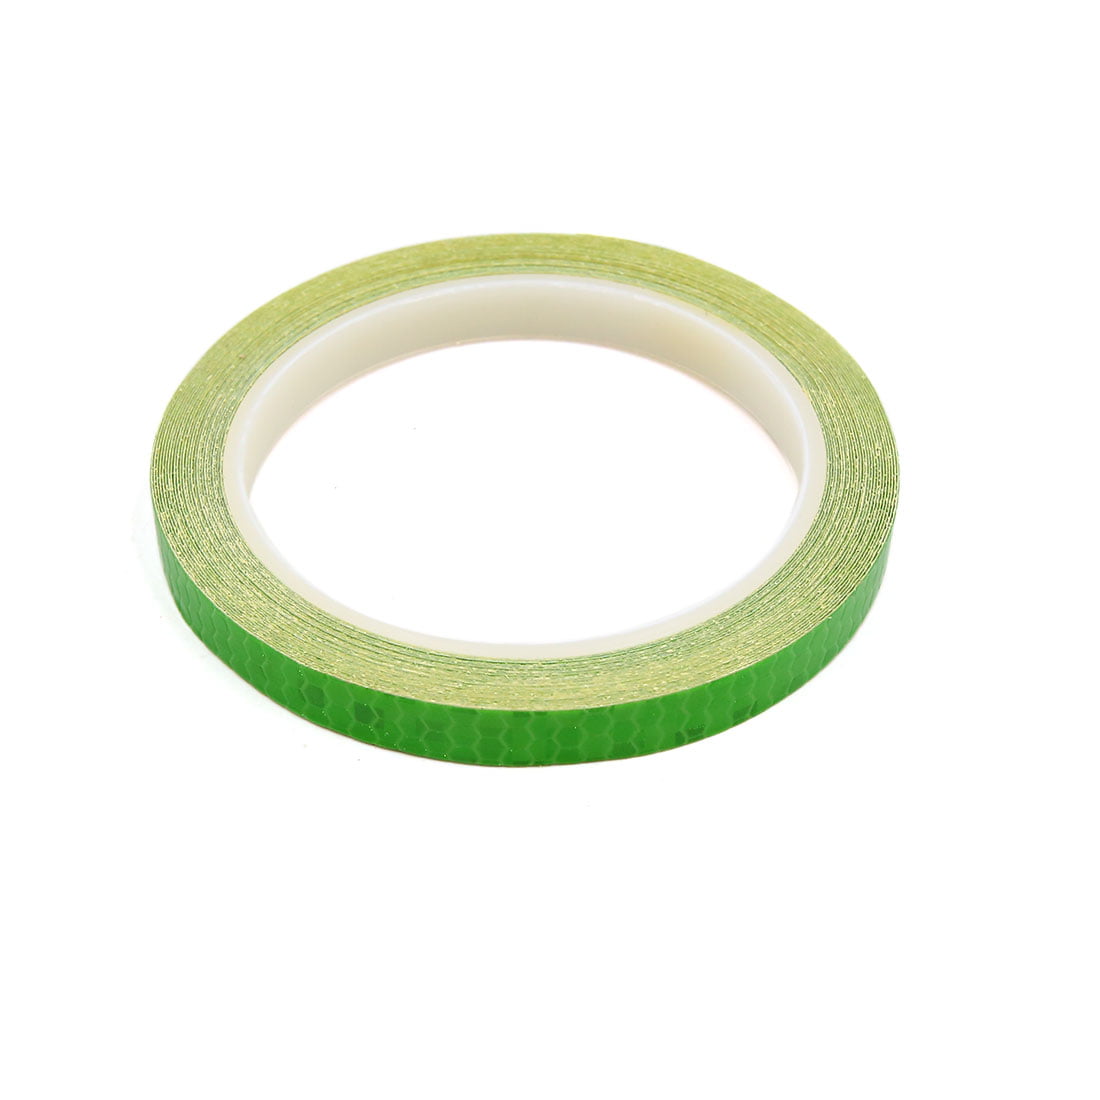 Green 10mm Self Adhesive Body Stripe Reflective Sticker Tape for Car ...